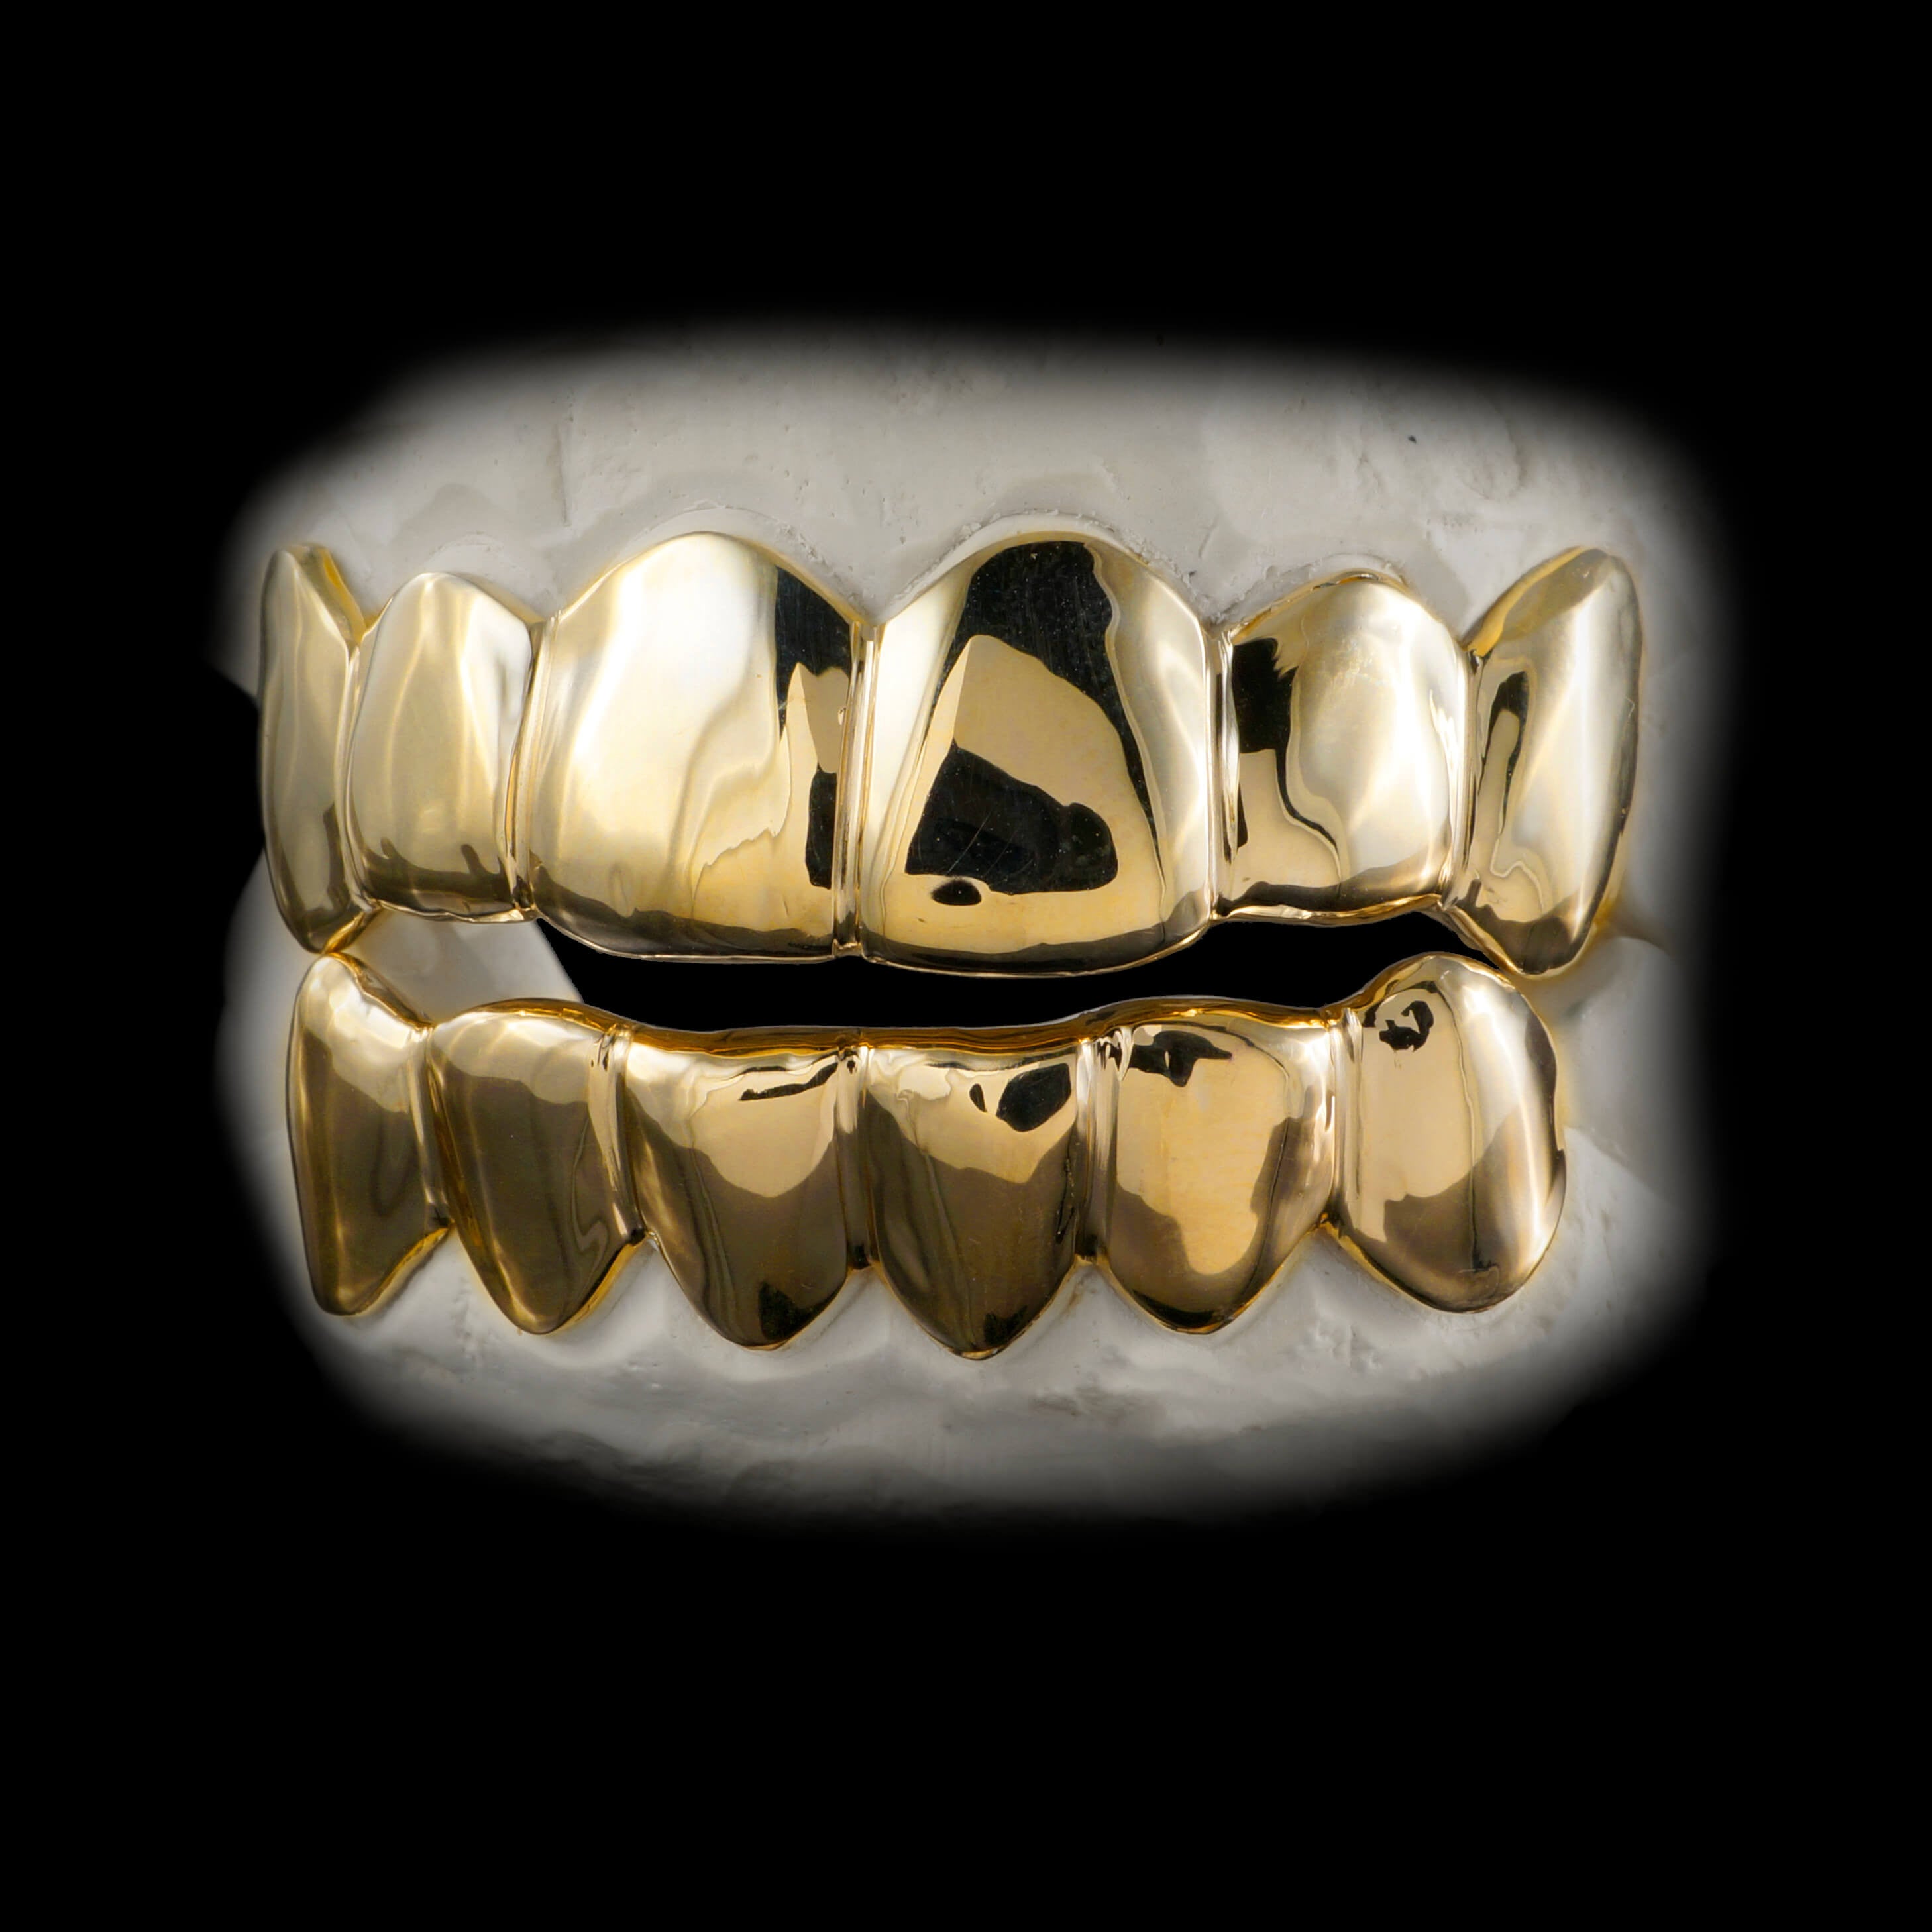 6 Tooth Top and 6 Tooth Bottom Grillz Set